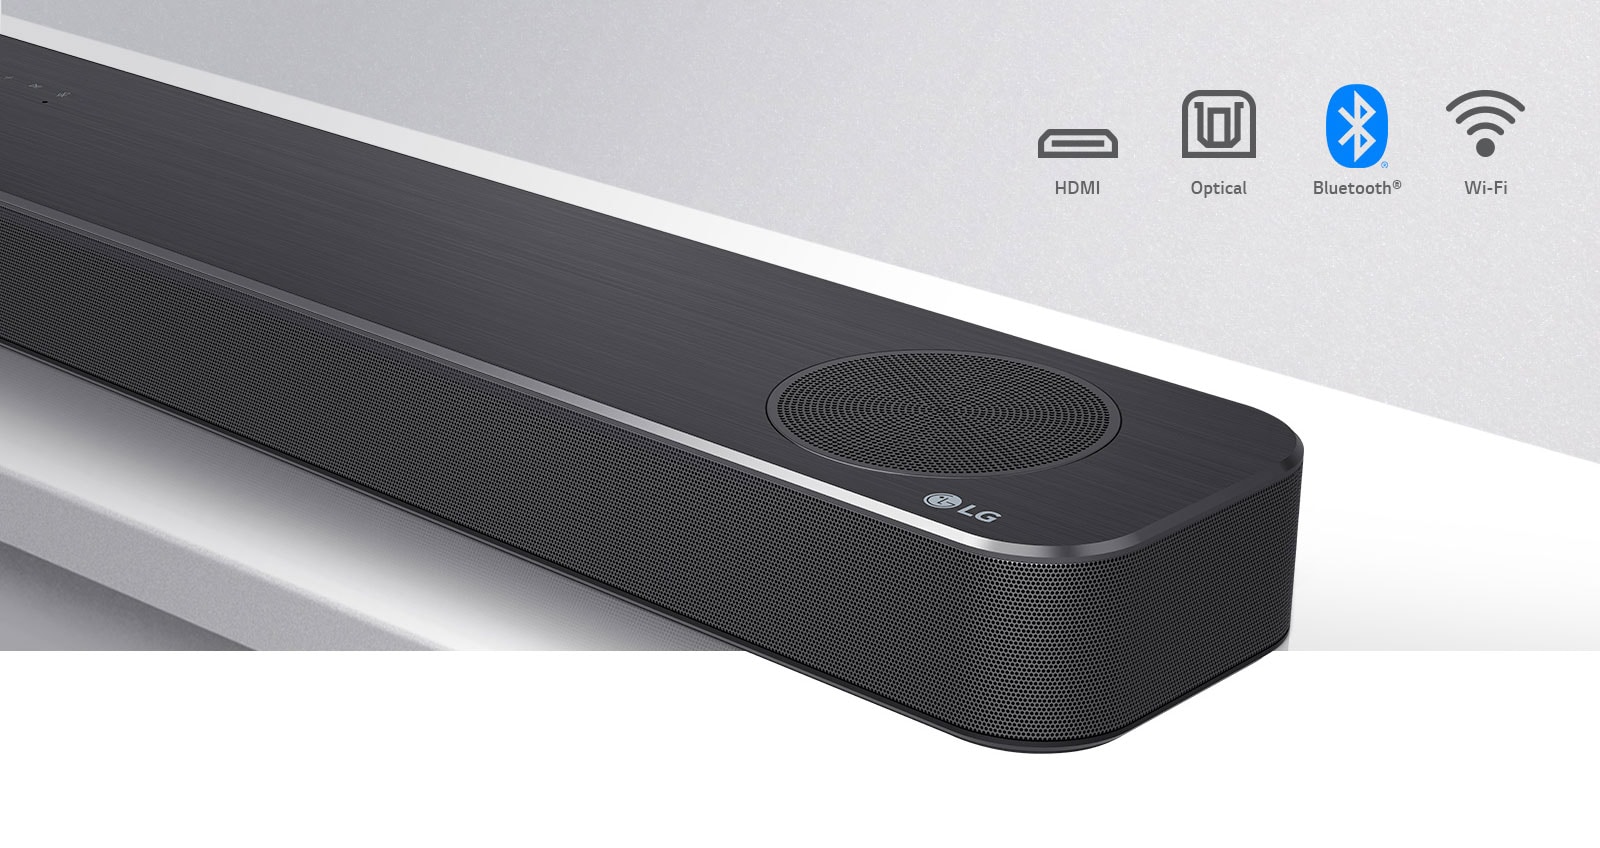 Close-up LG Soundbar right side with LG logo on the bottom right corner. Connectivity icons shown above the product. 